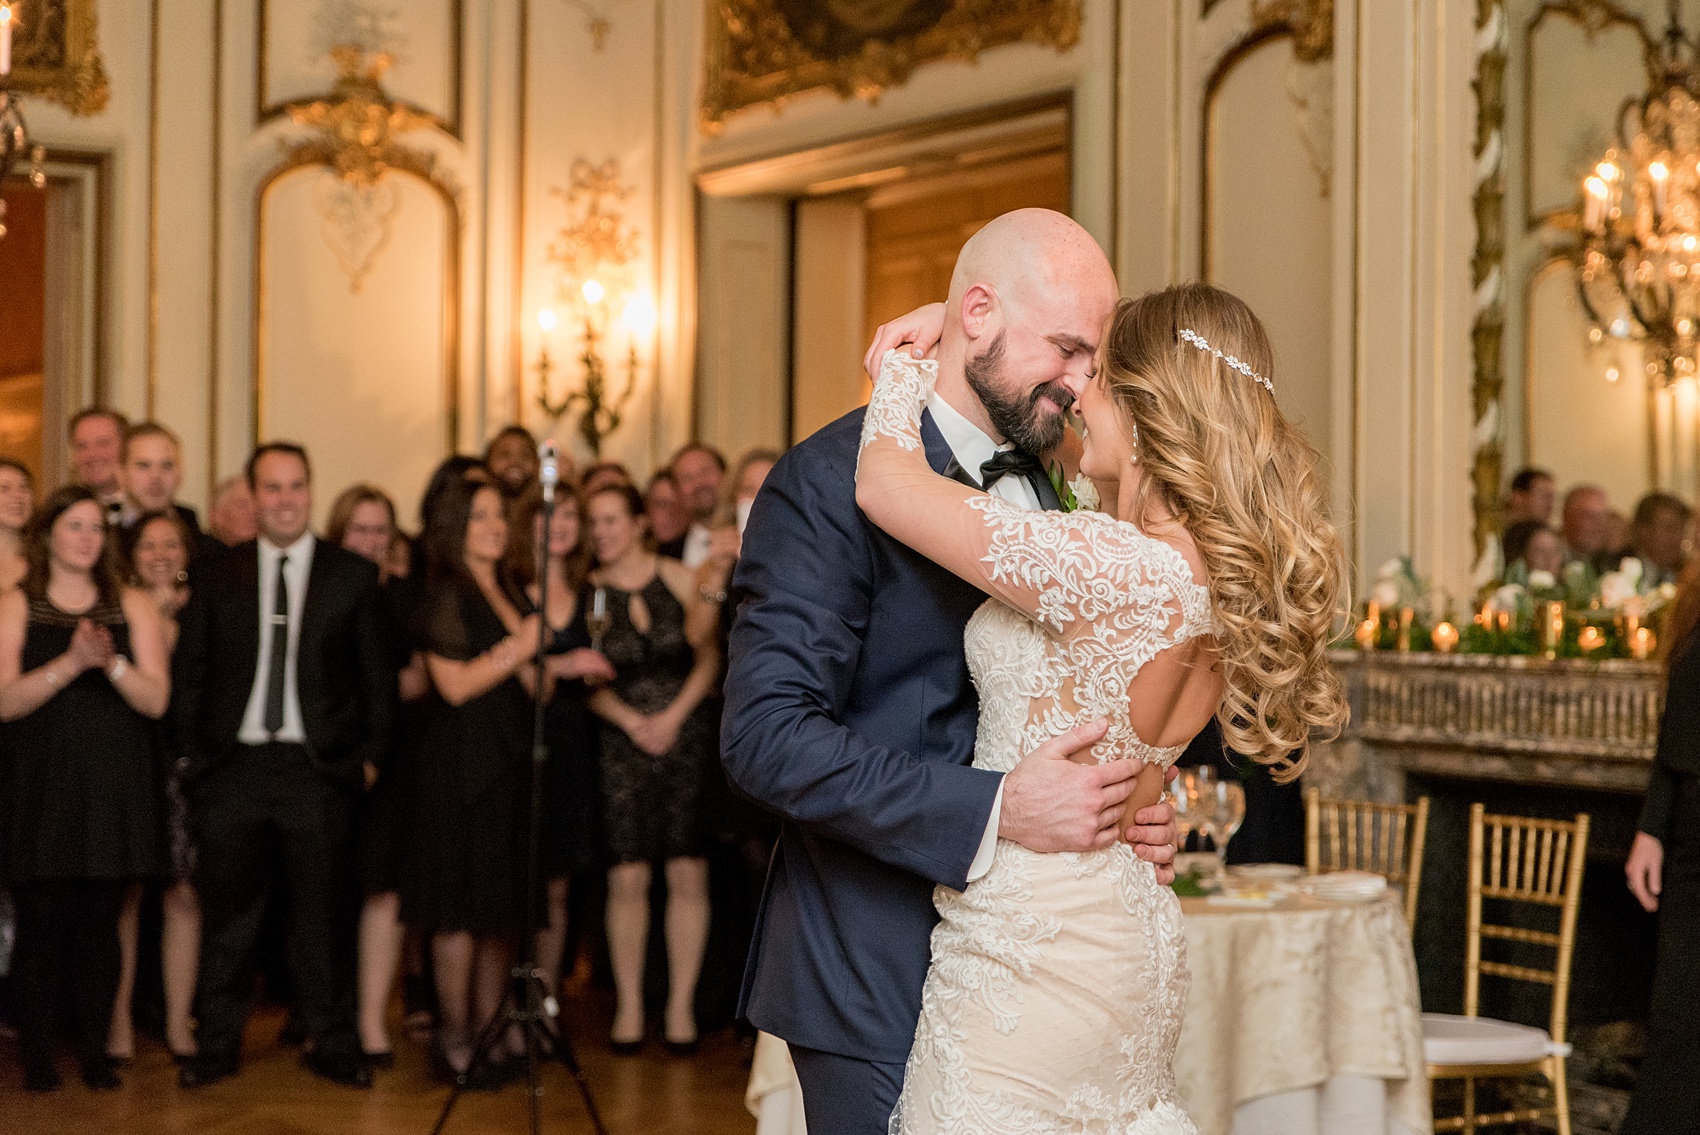 Wedding photos at Sleepy Hollow Country Club for a winter reception in January by Mikkel Paige Photography. They shared their first dance at their NY winter wedding, inside the ornate center room of the venue.